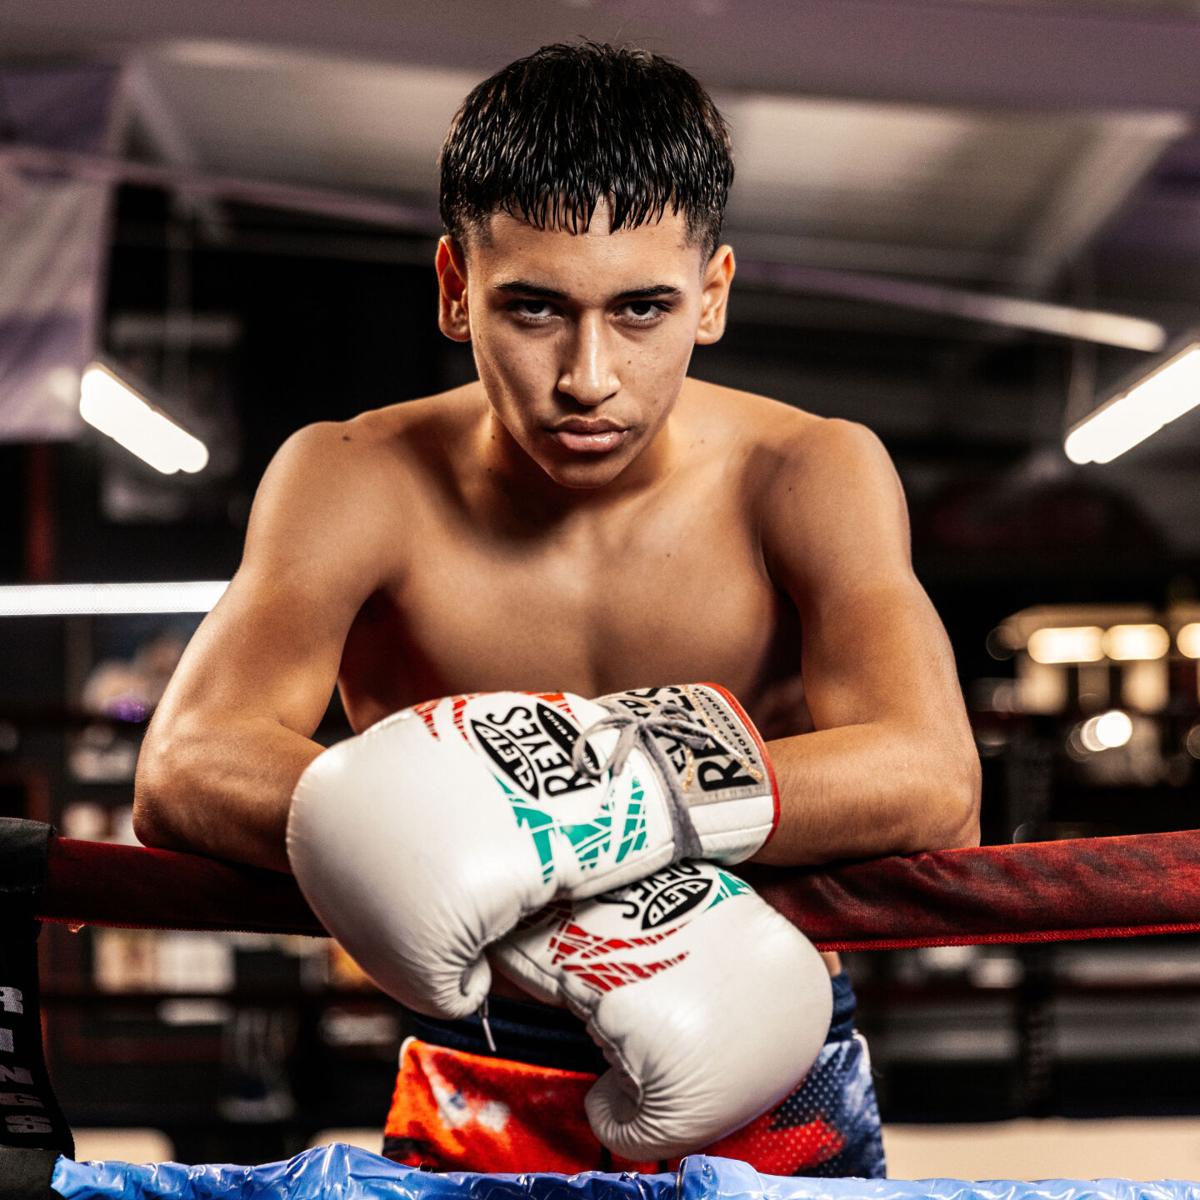 El Fosforito,' 18, hopes Friday's U.S. debut leads to incandescent boxing  career